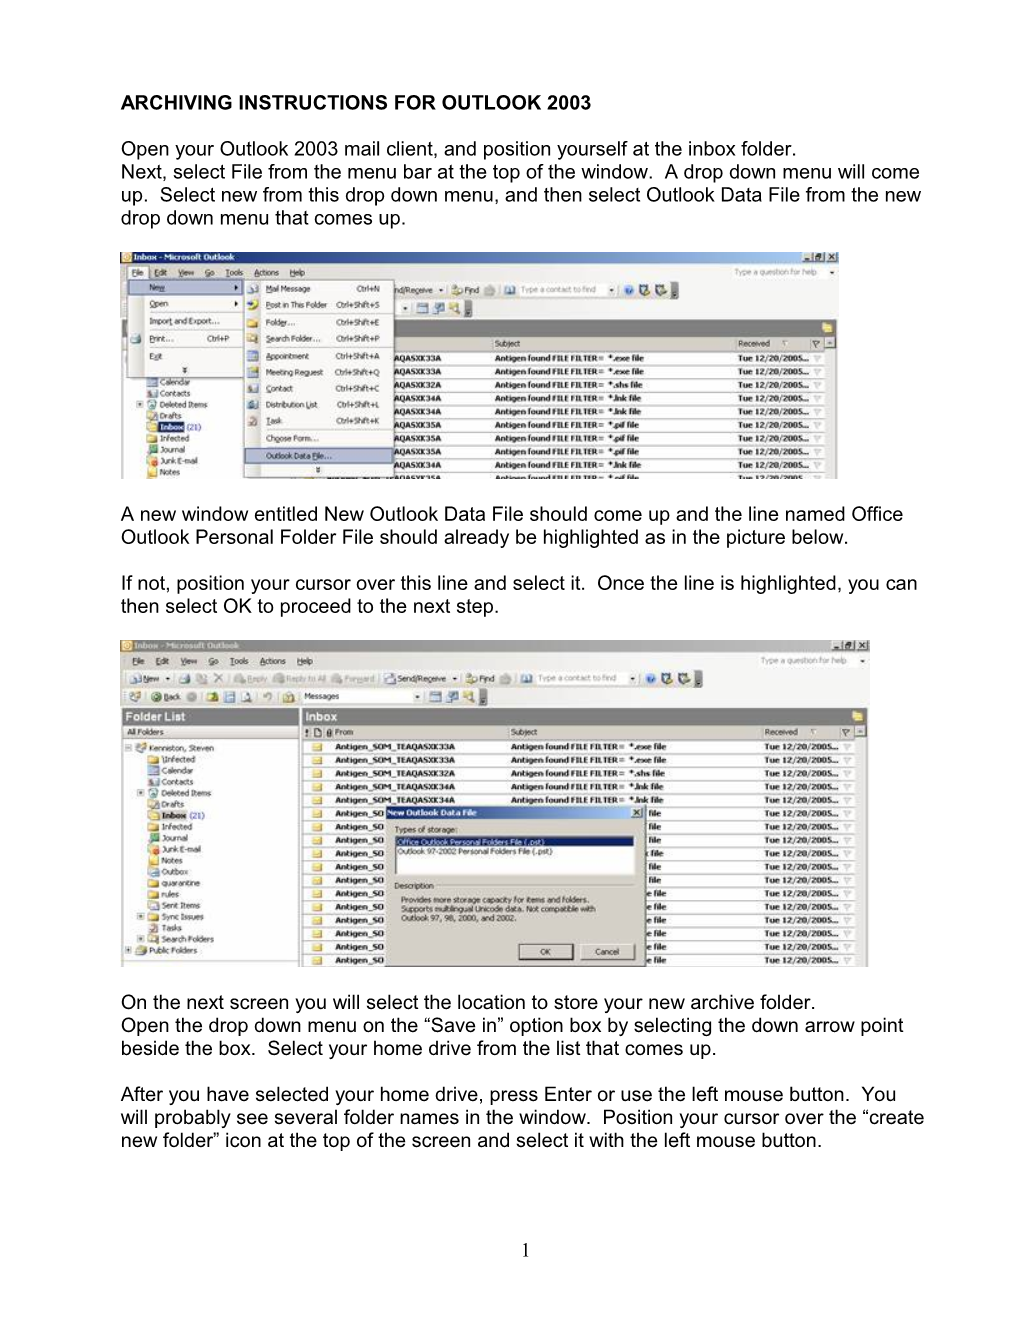 Archiving Instructions for Outlook 2003